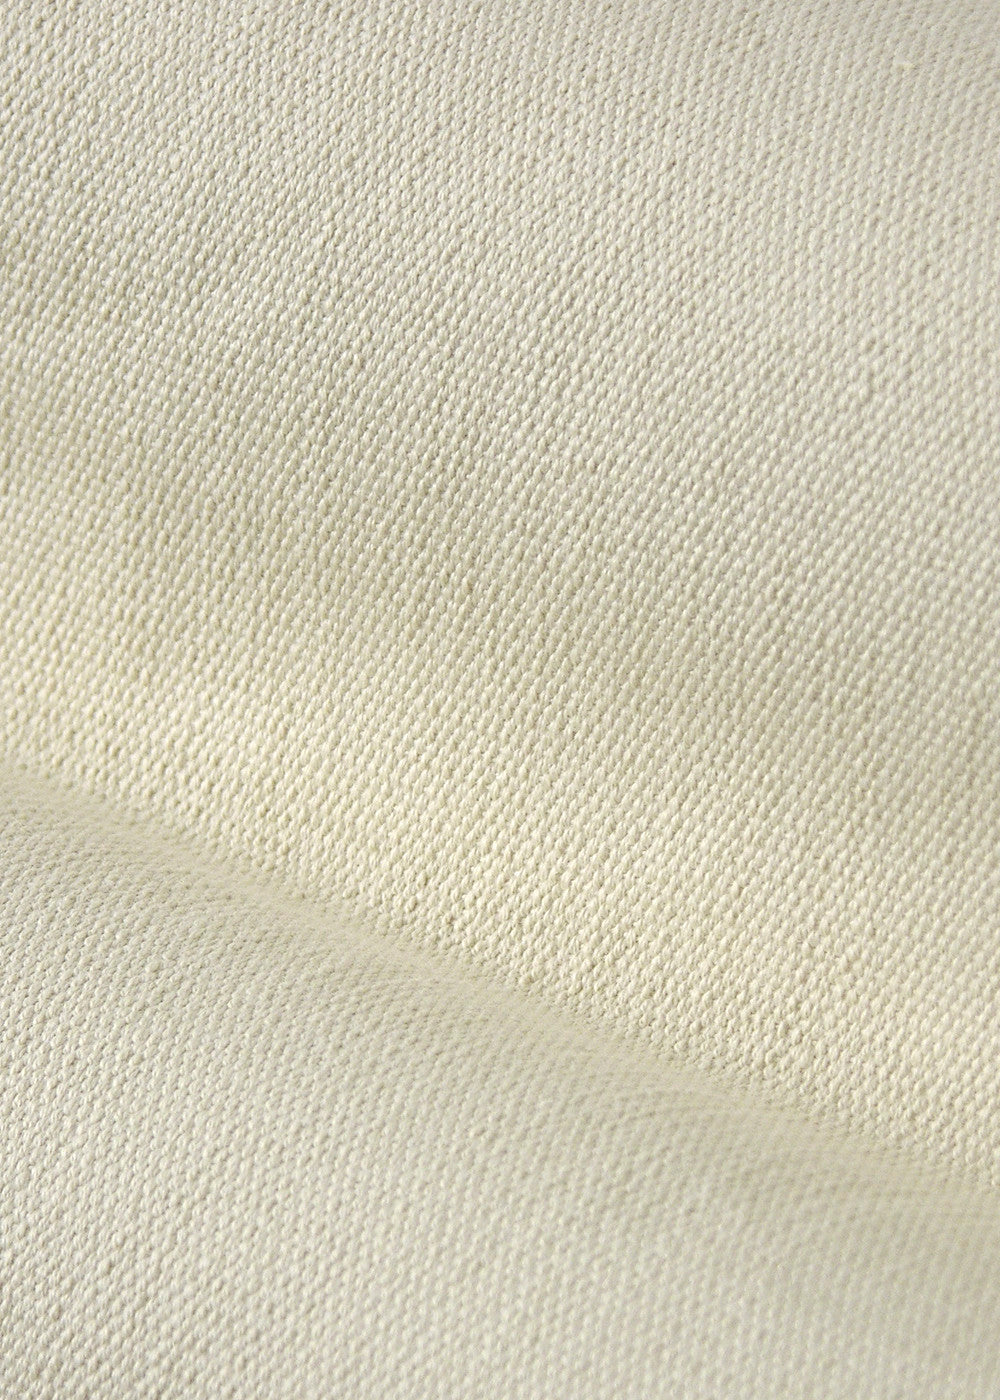 close up texture of a cream-colored fabric